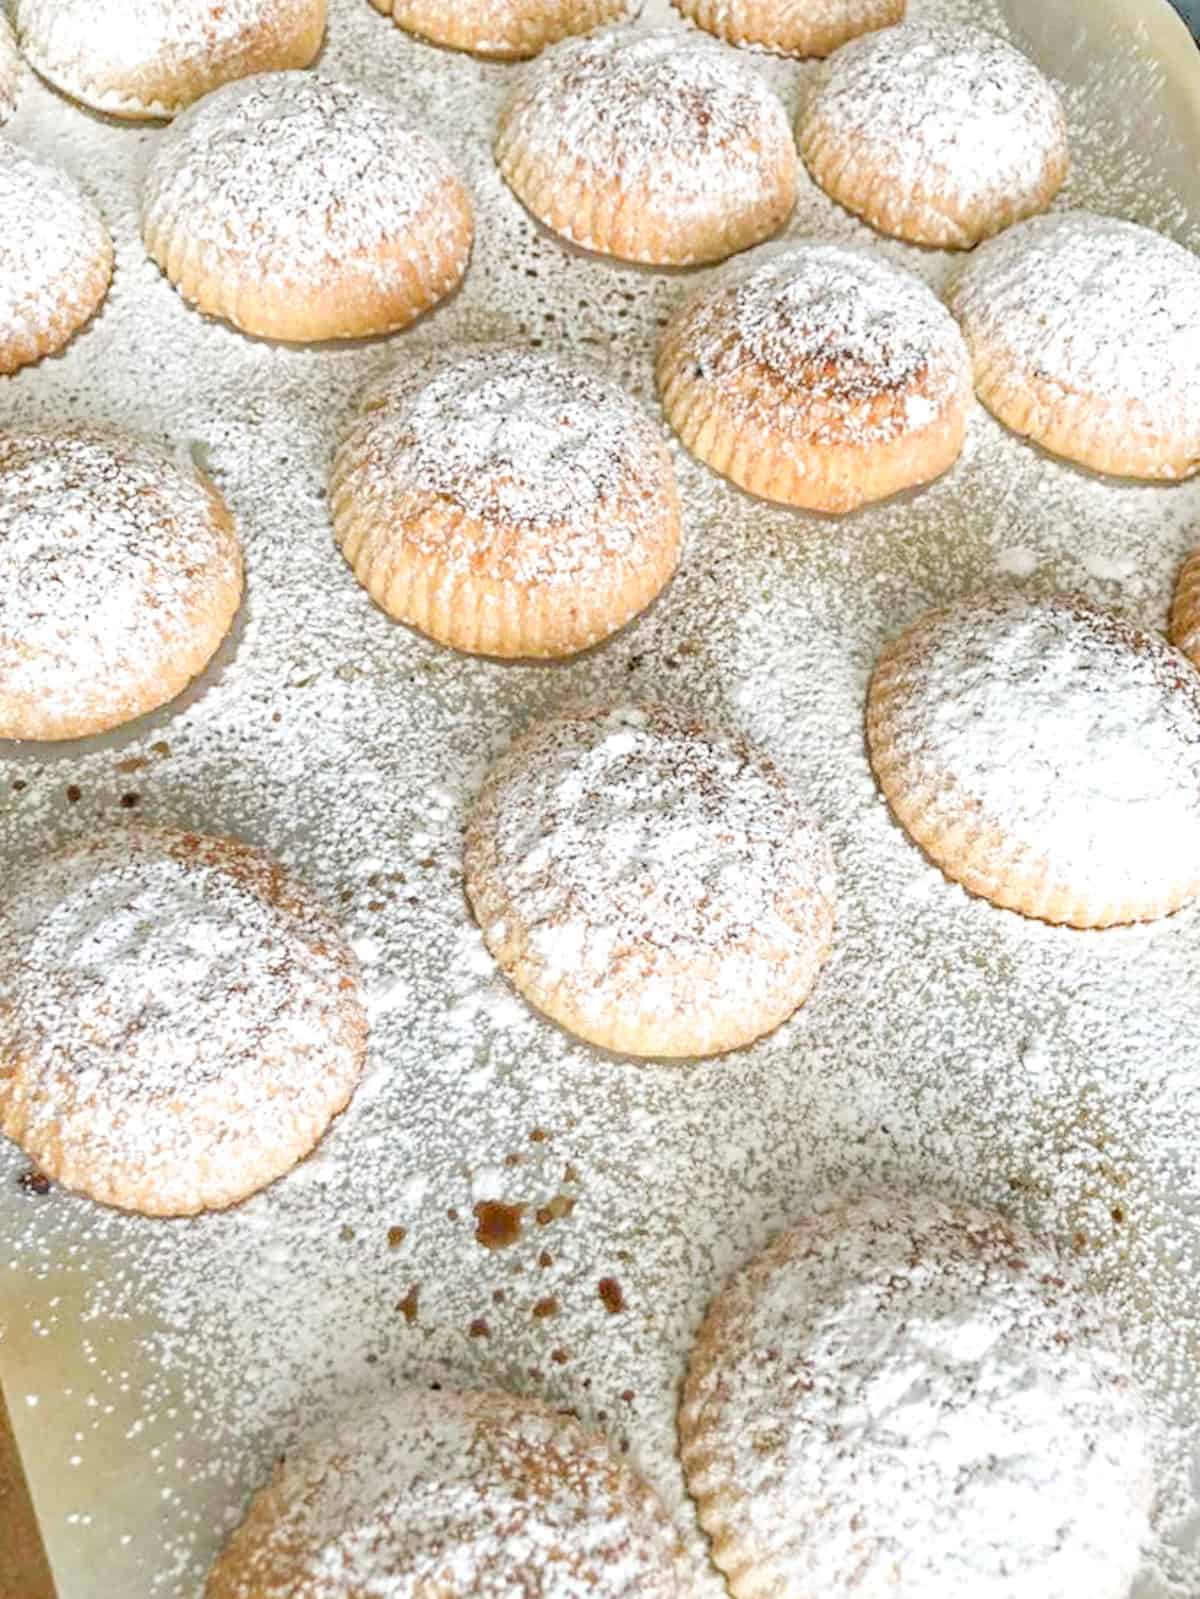 Lebanese Maamoul cookies filled with pistachios or date and topped with powdered sugar.